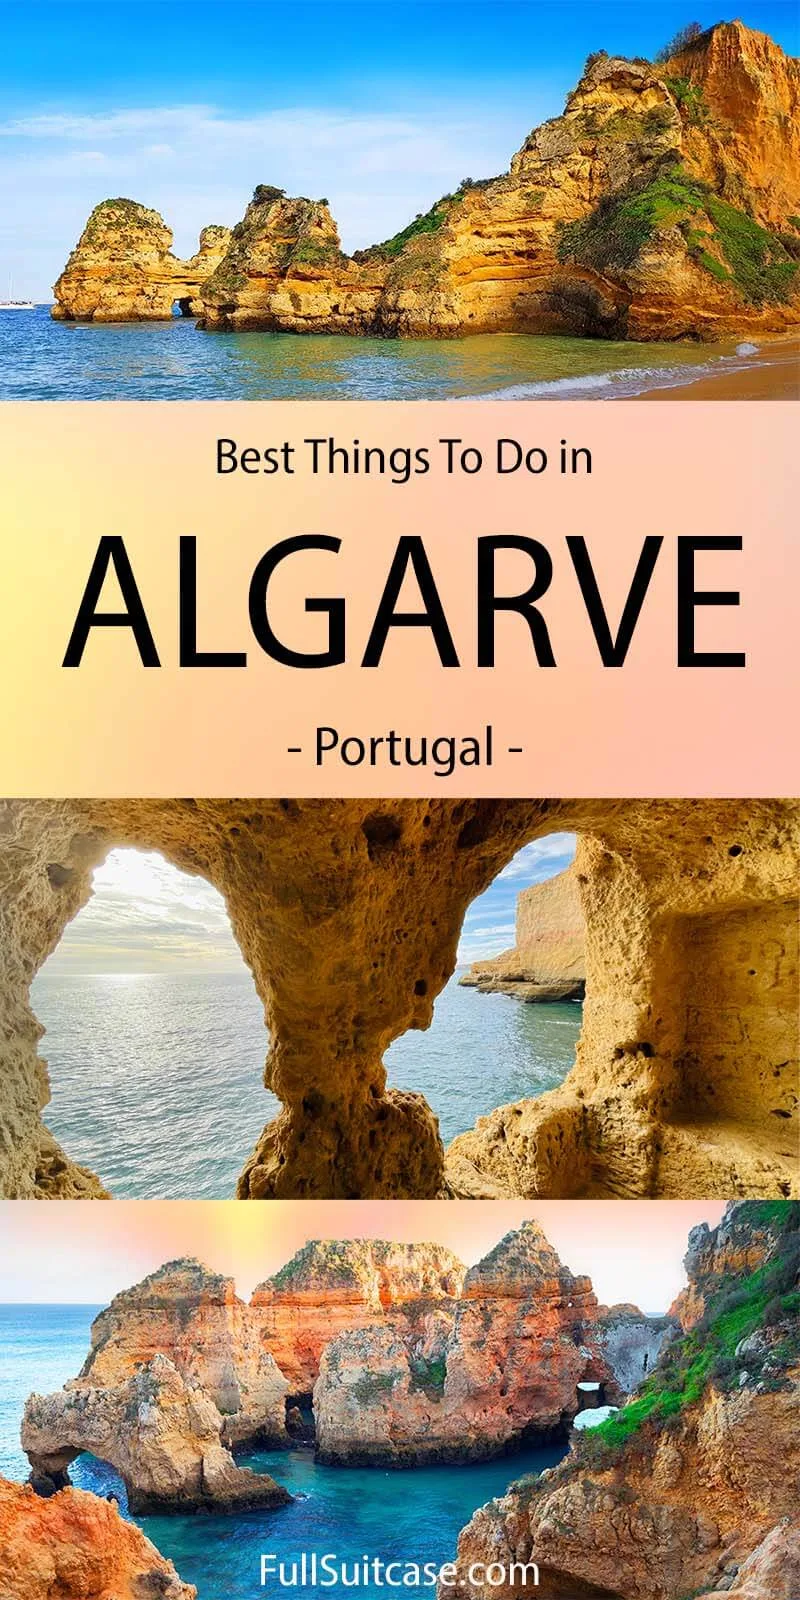 Things to do in Algarve - top places to see for first time visitors